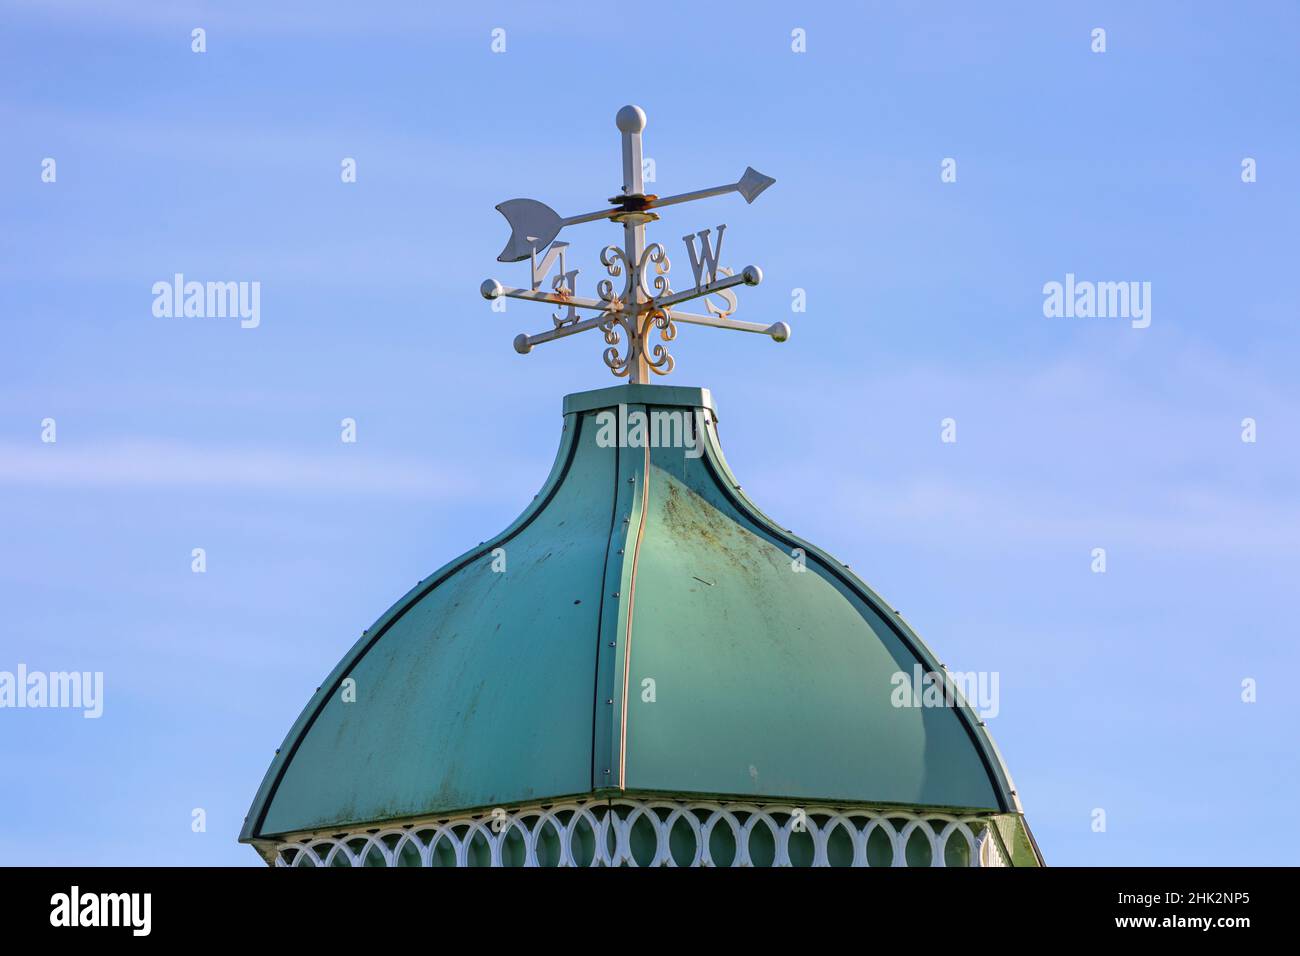 A rusting weather vane on a small pagoda roof Stock Photo